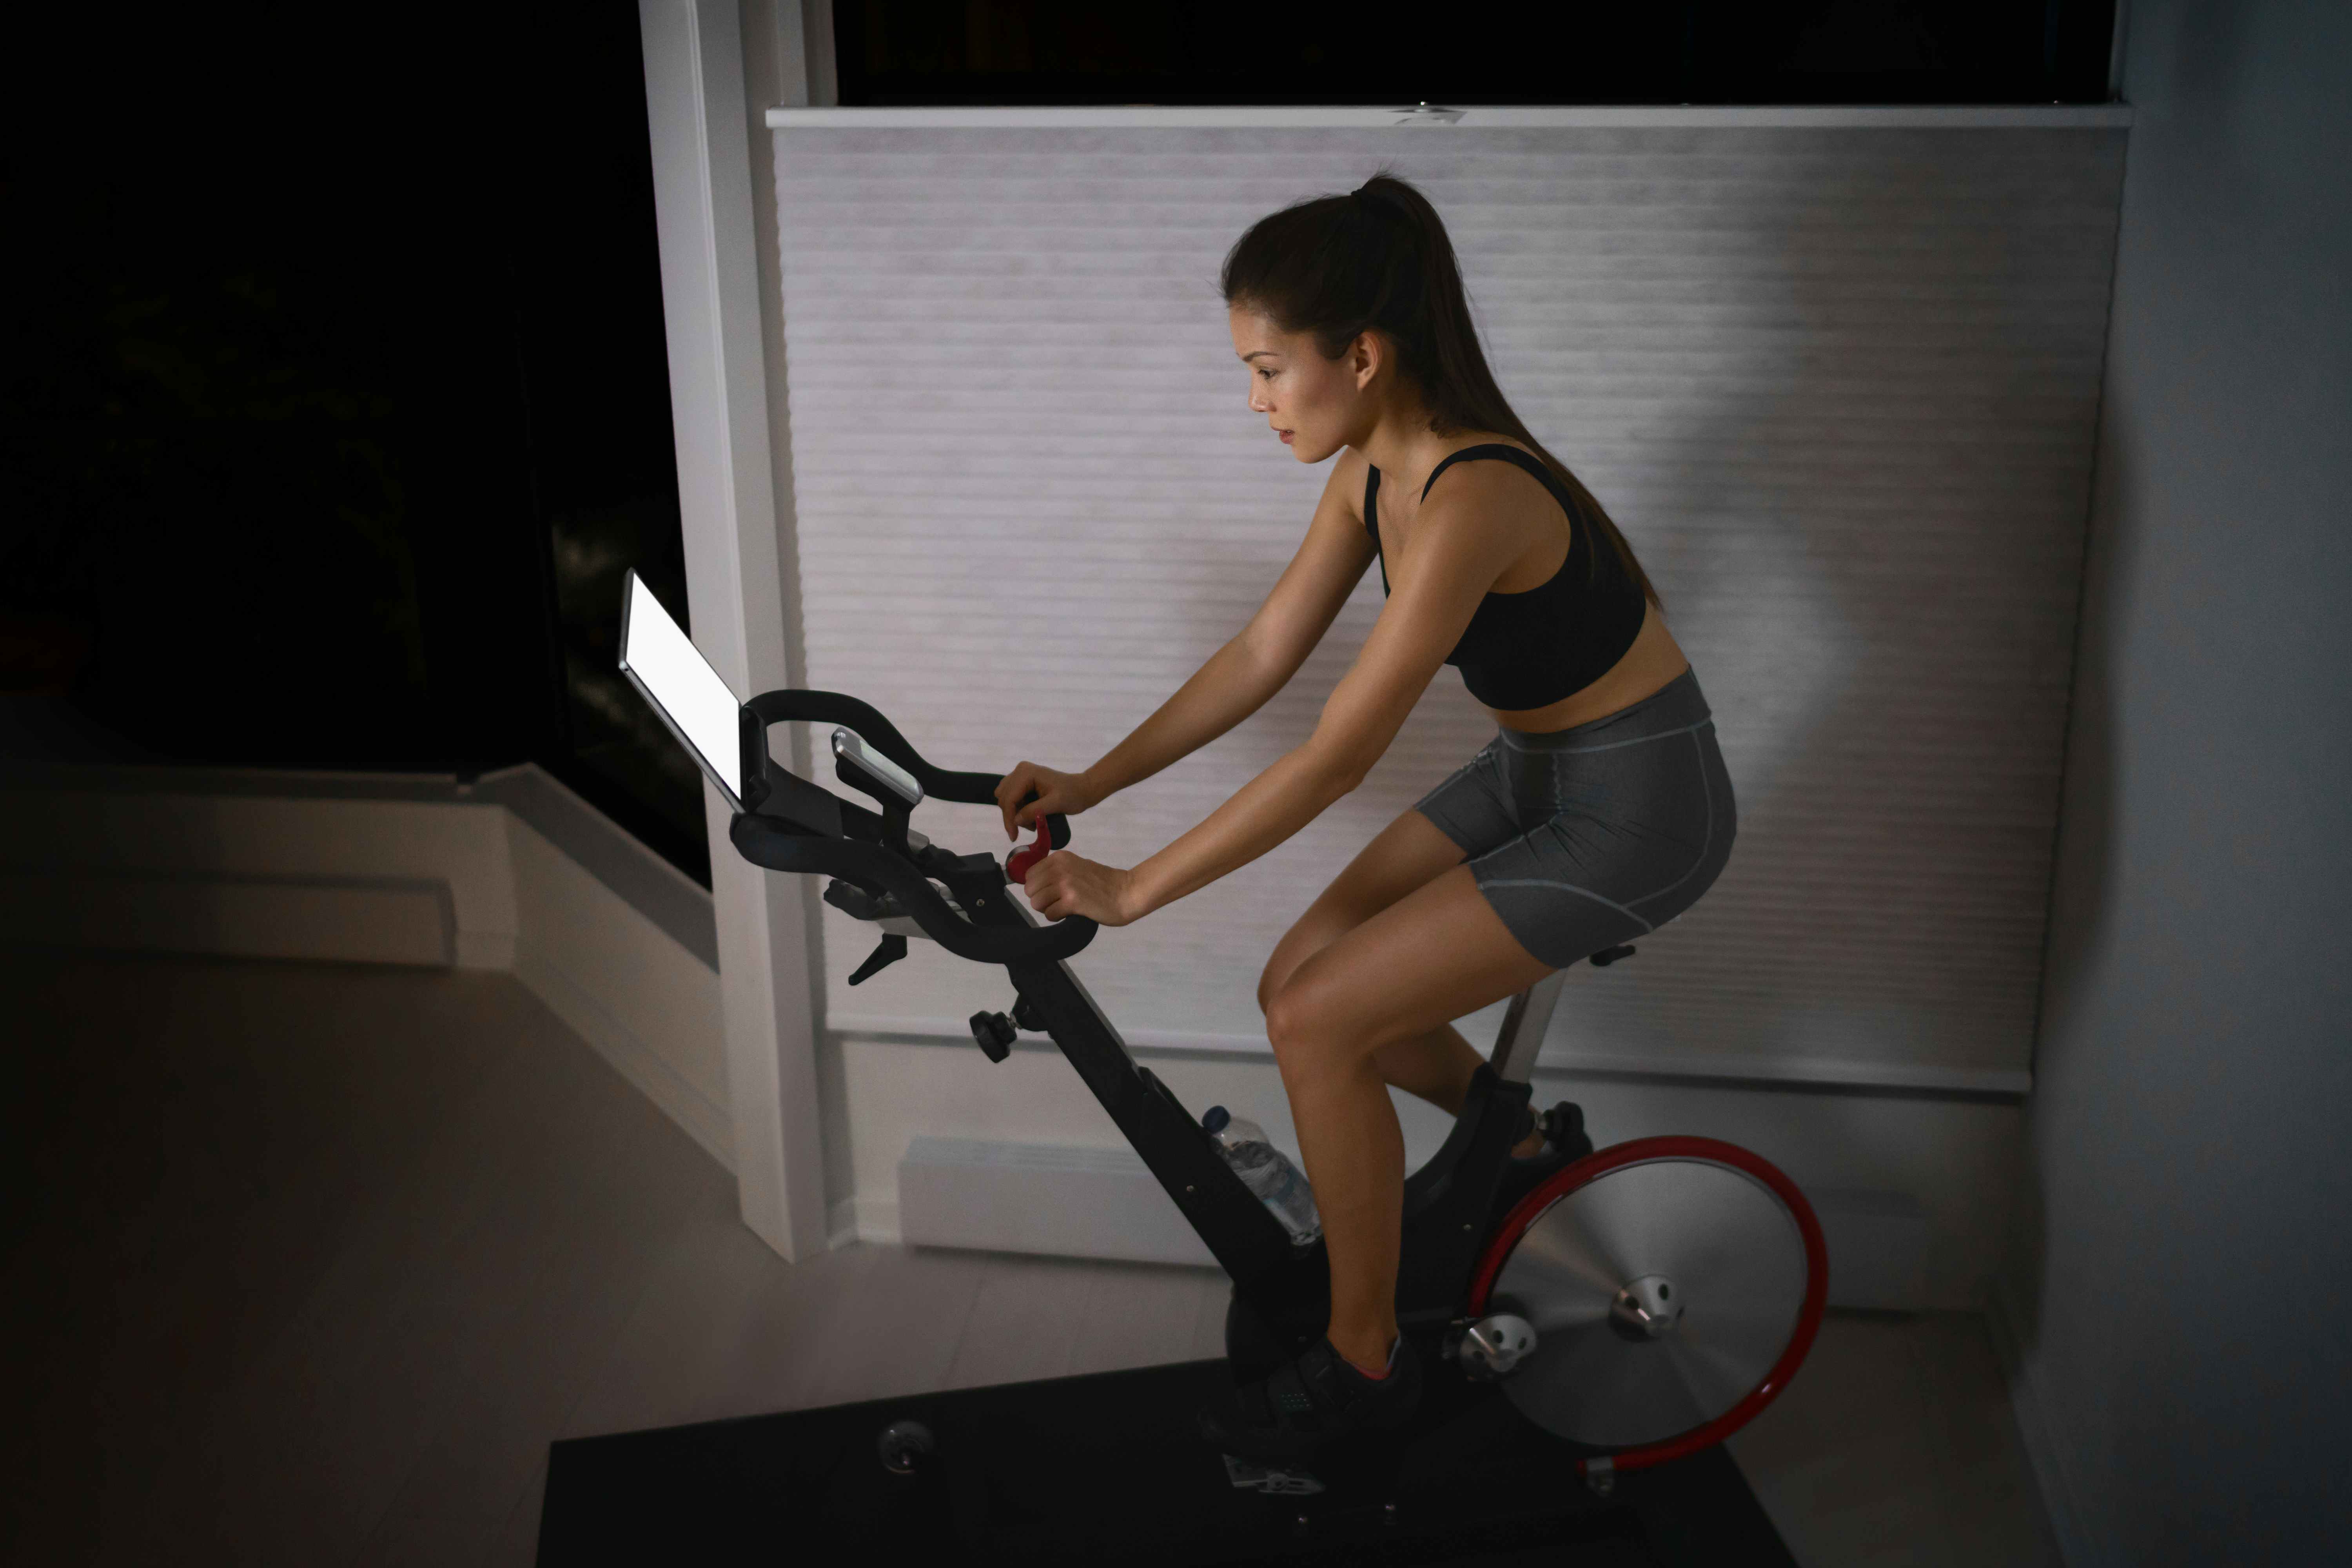 A woman on a stationary bike with a screen